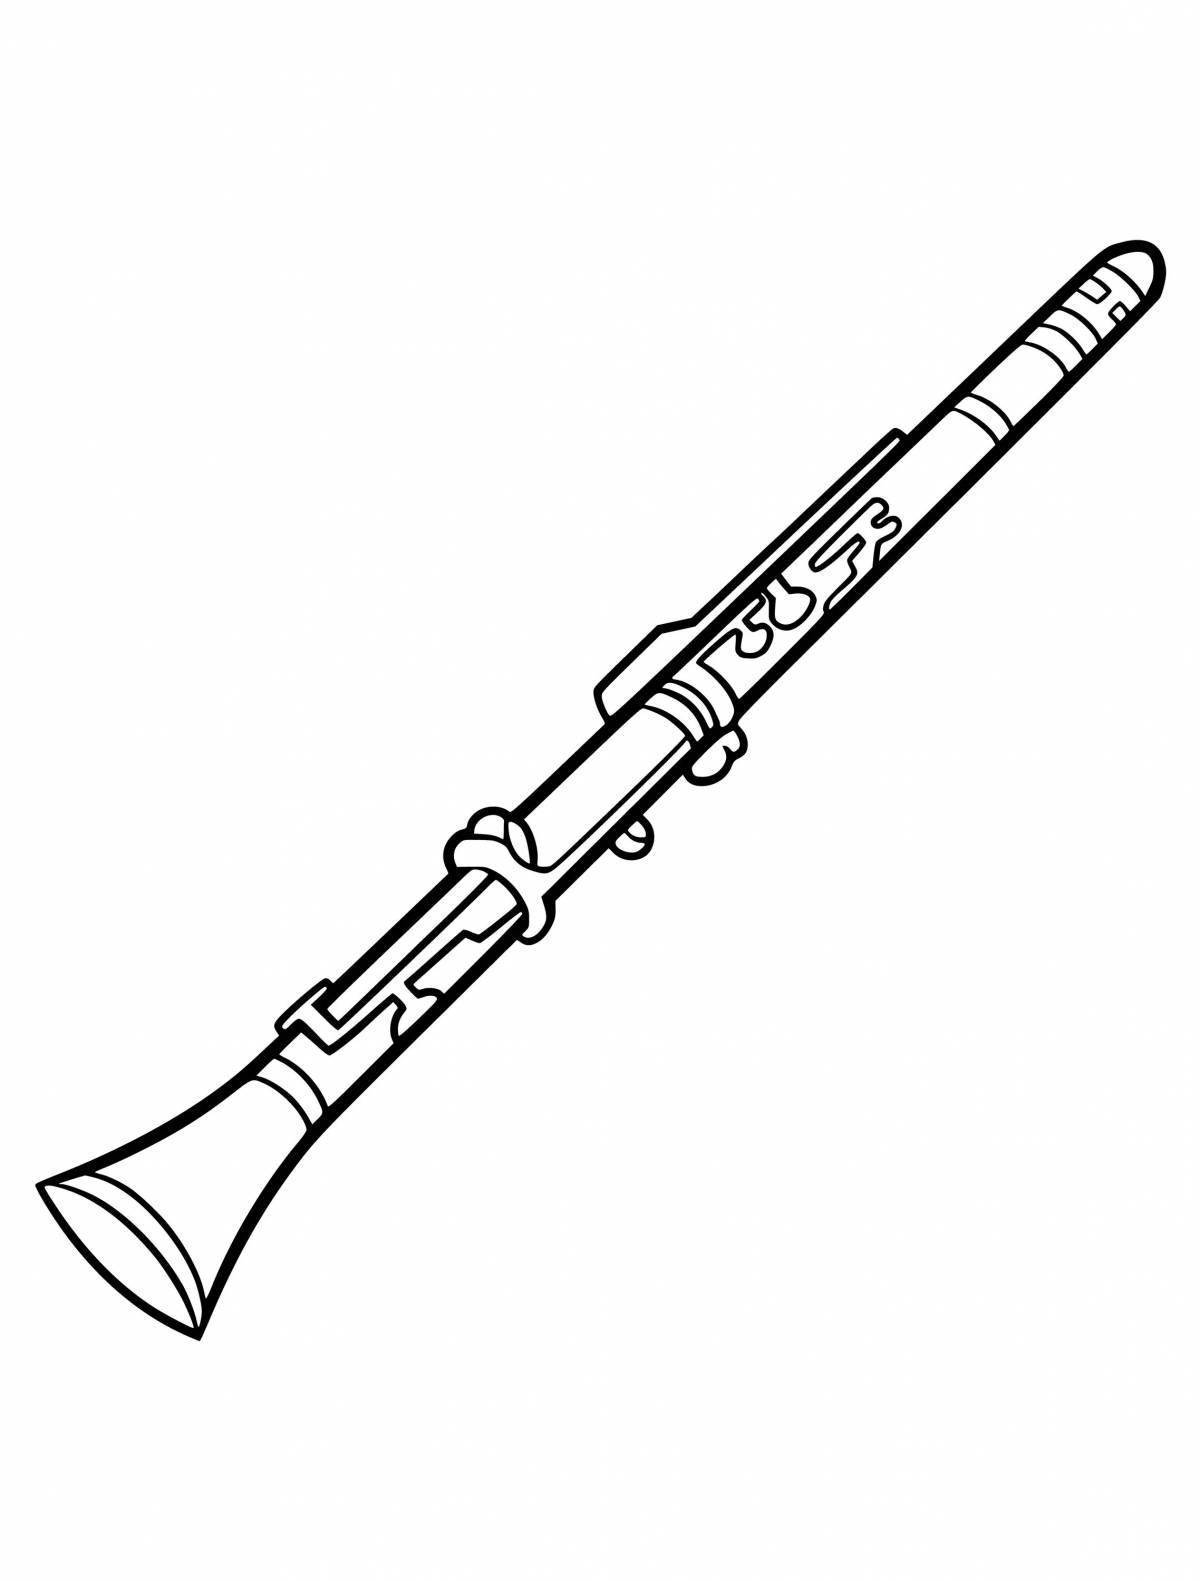 Colouring funny flute